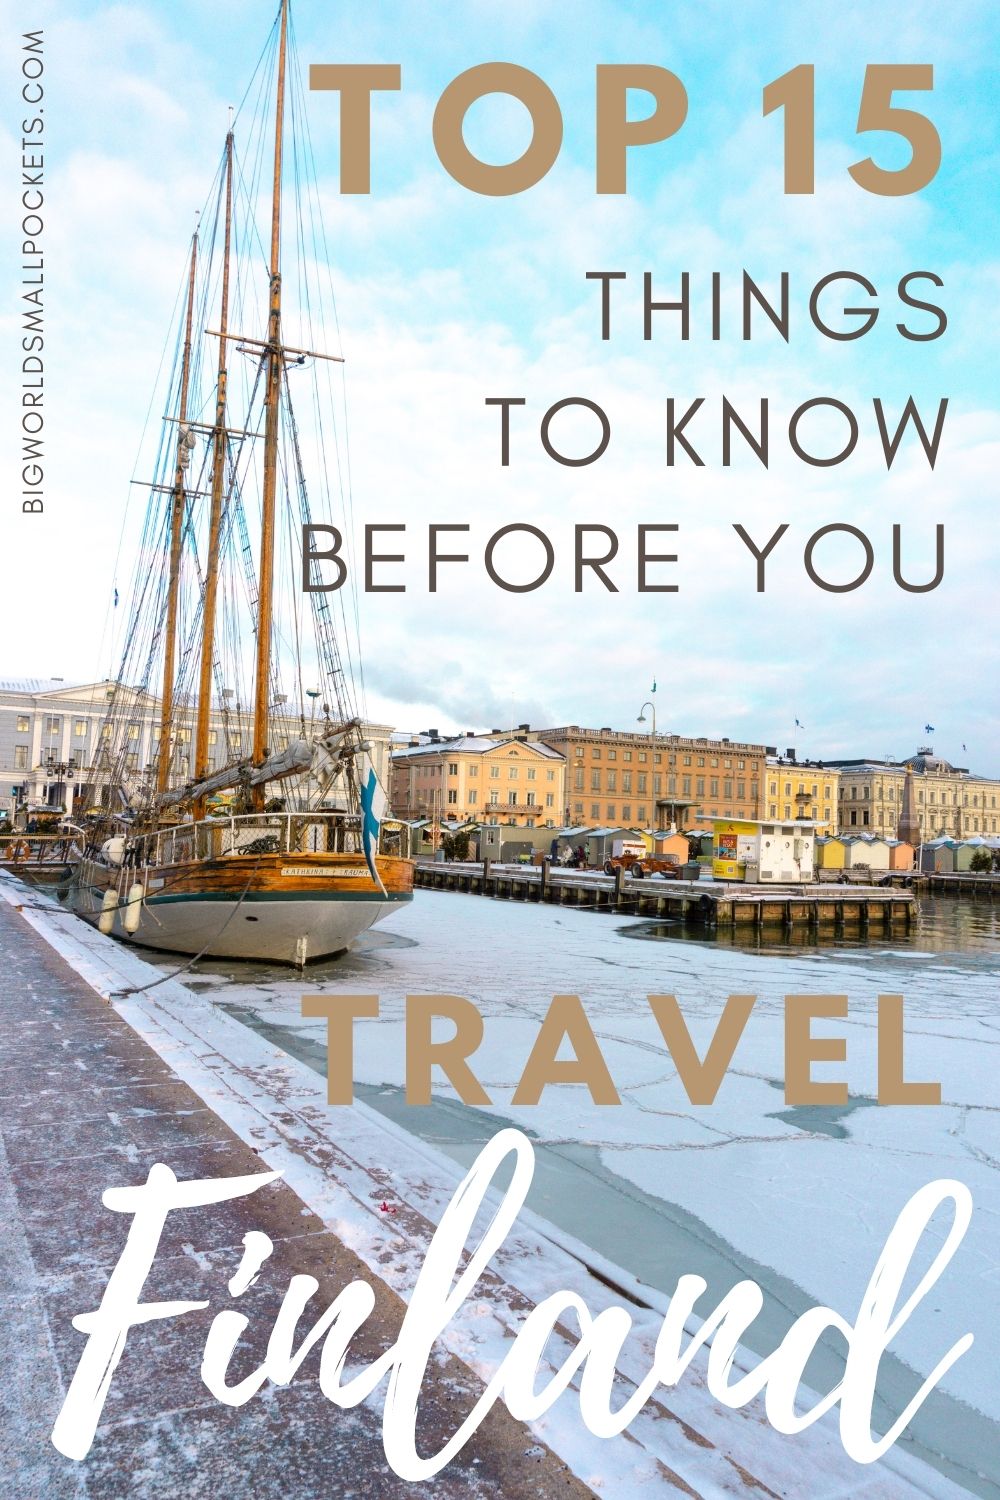 Top 15 Things to Know Before You Travel Finland